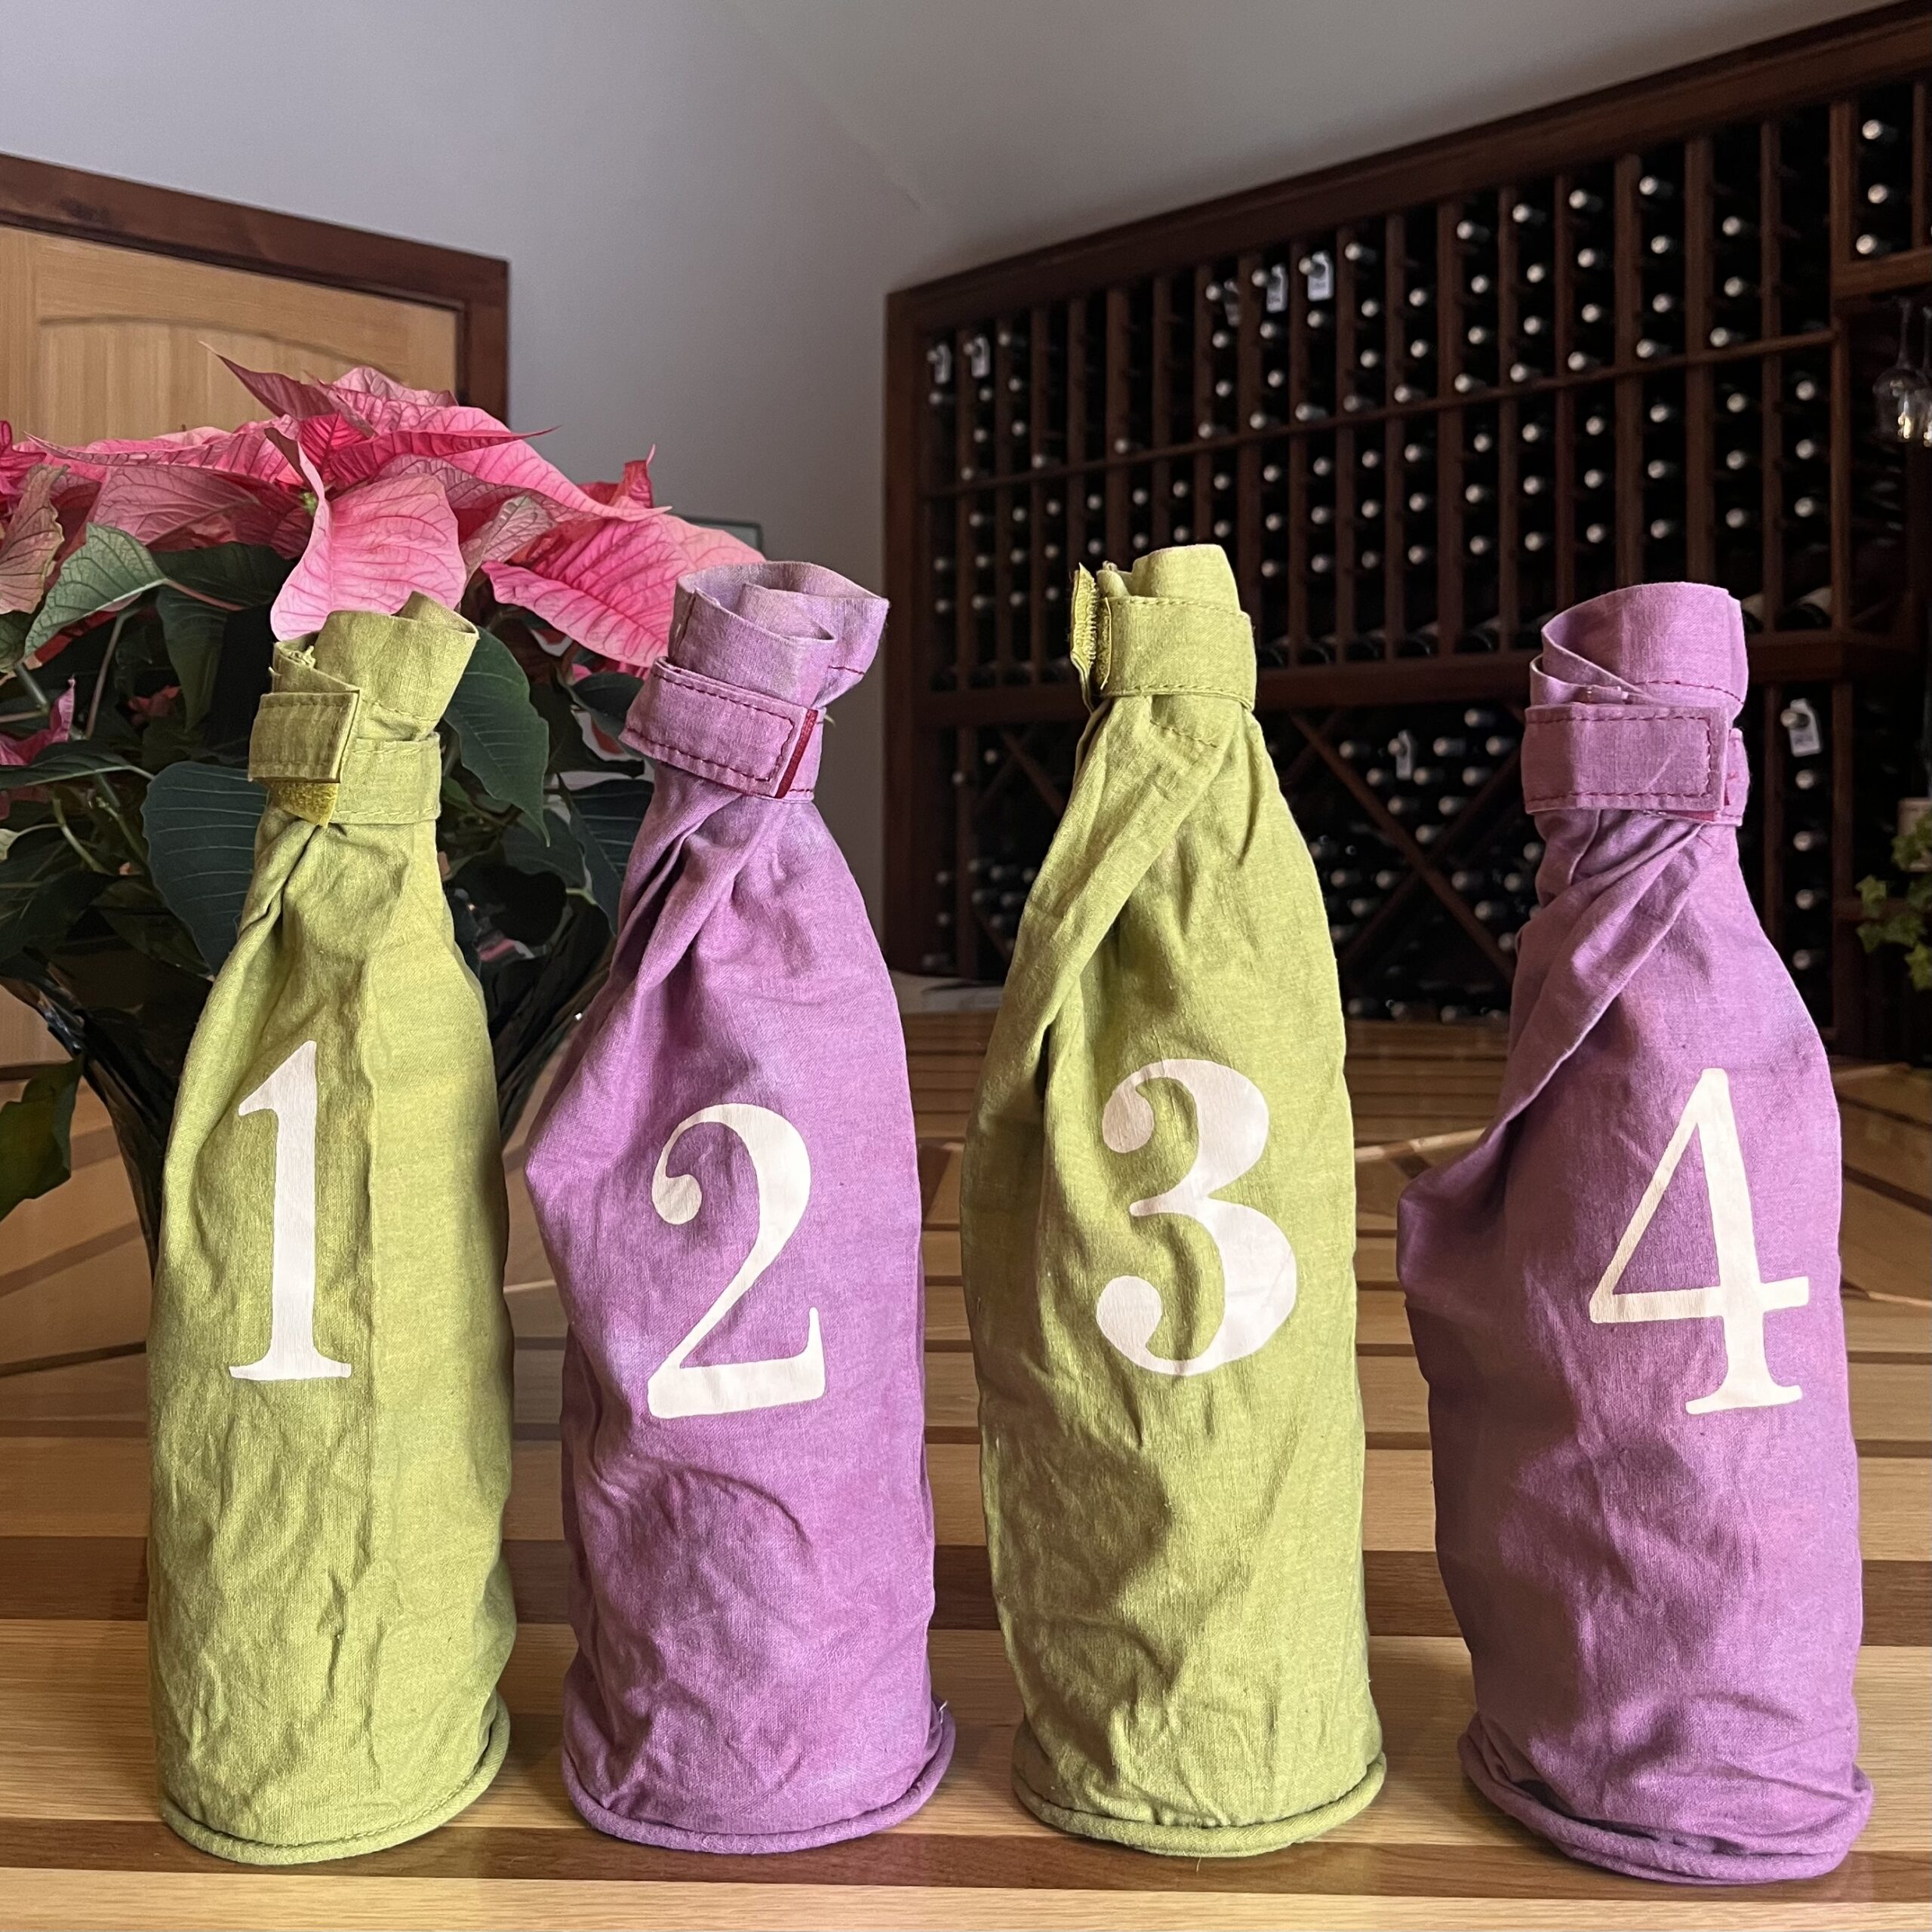 Wine bottles in numbered bags.